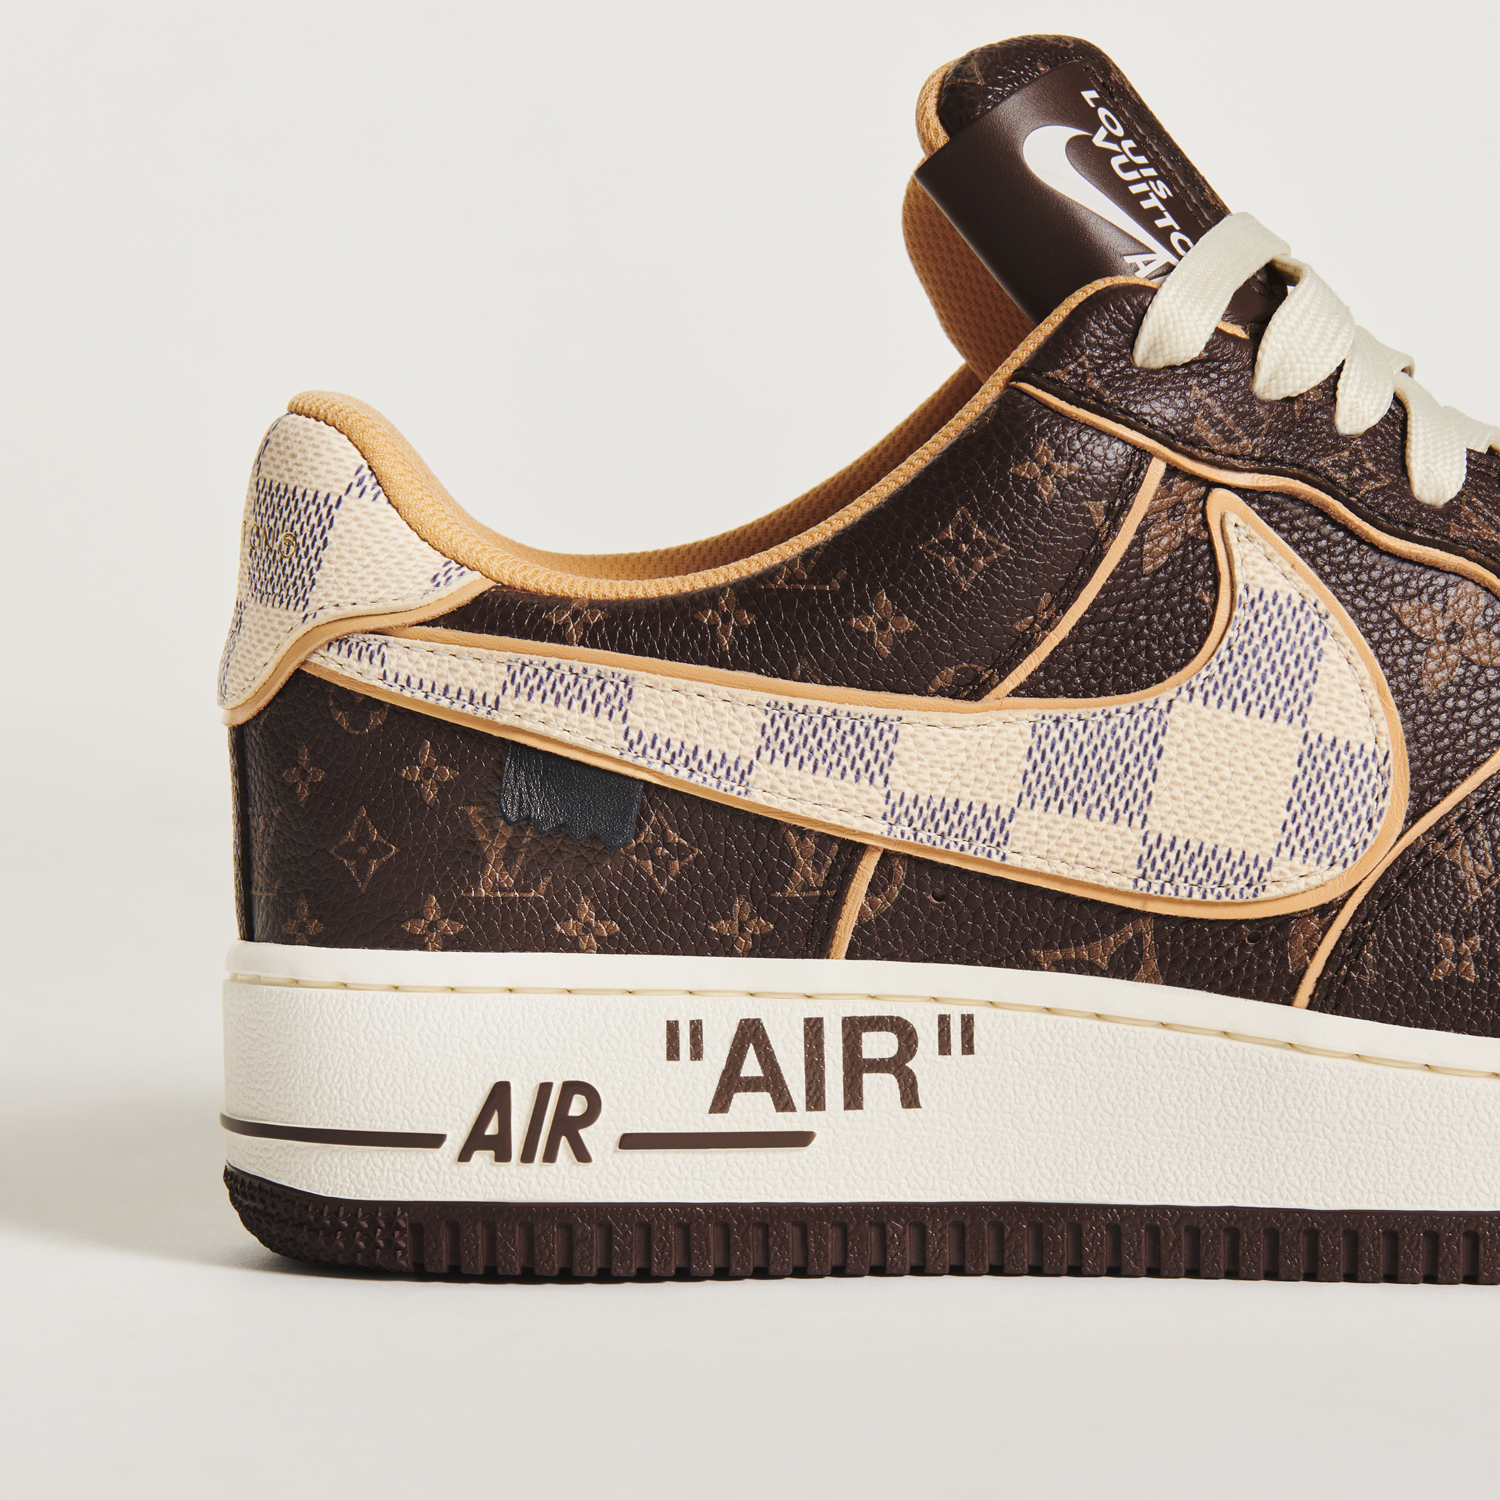 200 pairs of Louis Vuitton x Nike 'Air Force 1' shoes designed by Virgil  Abloh fetch $25 million at Sotheby's auction - The Economic Times